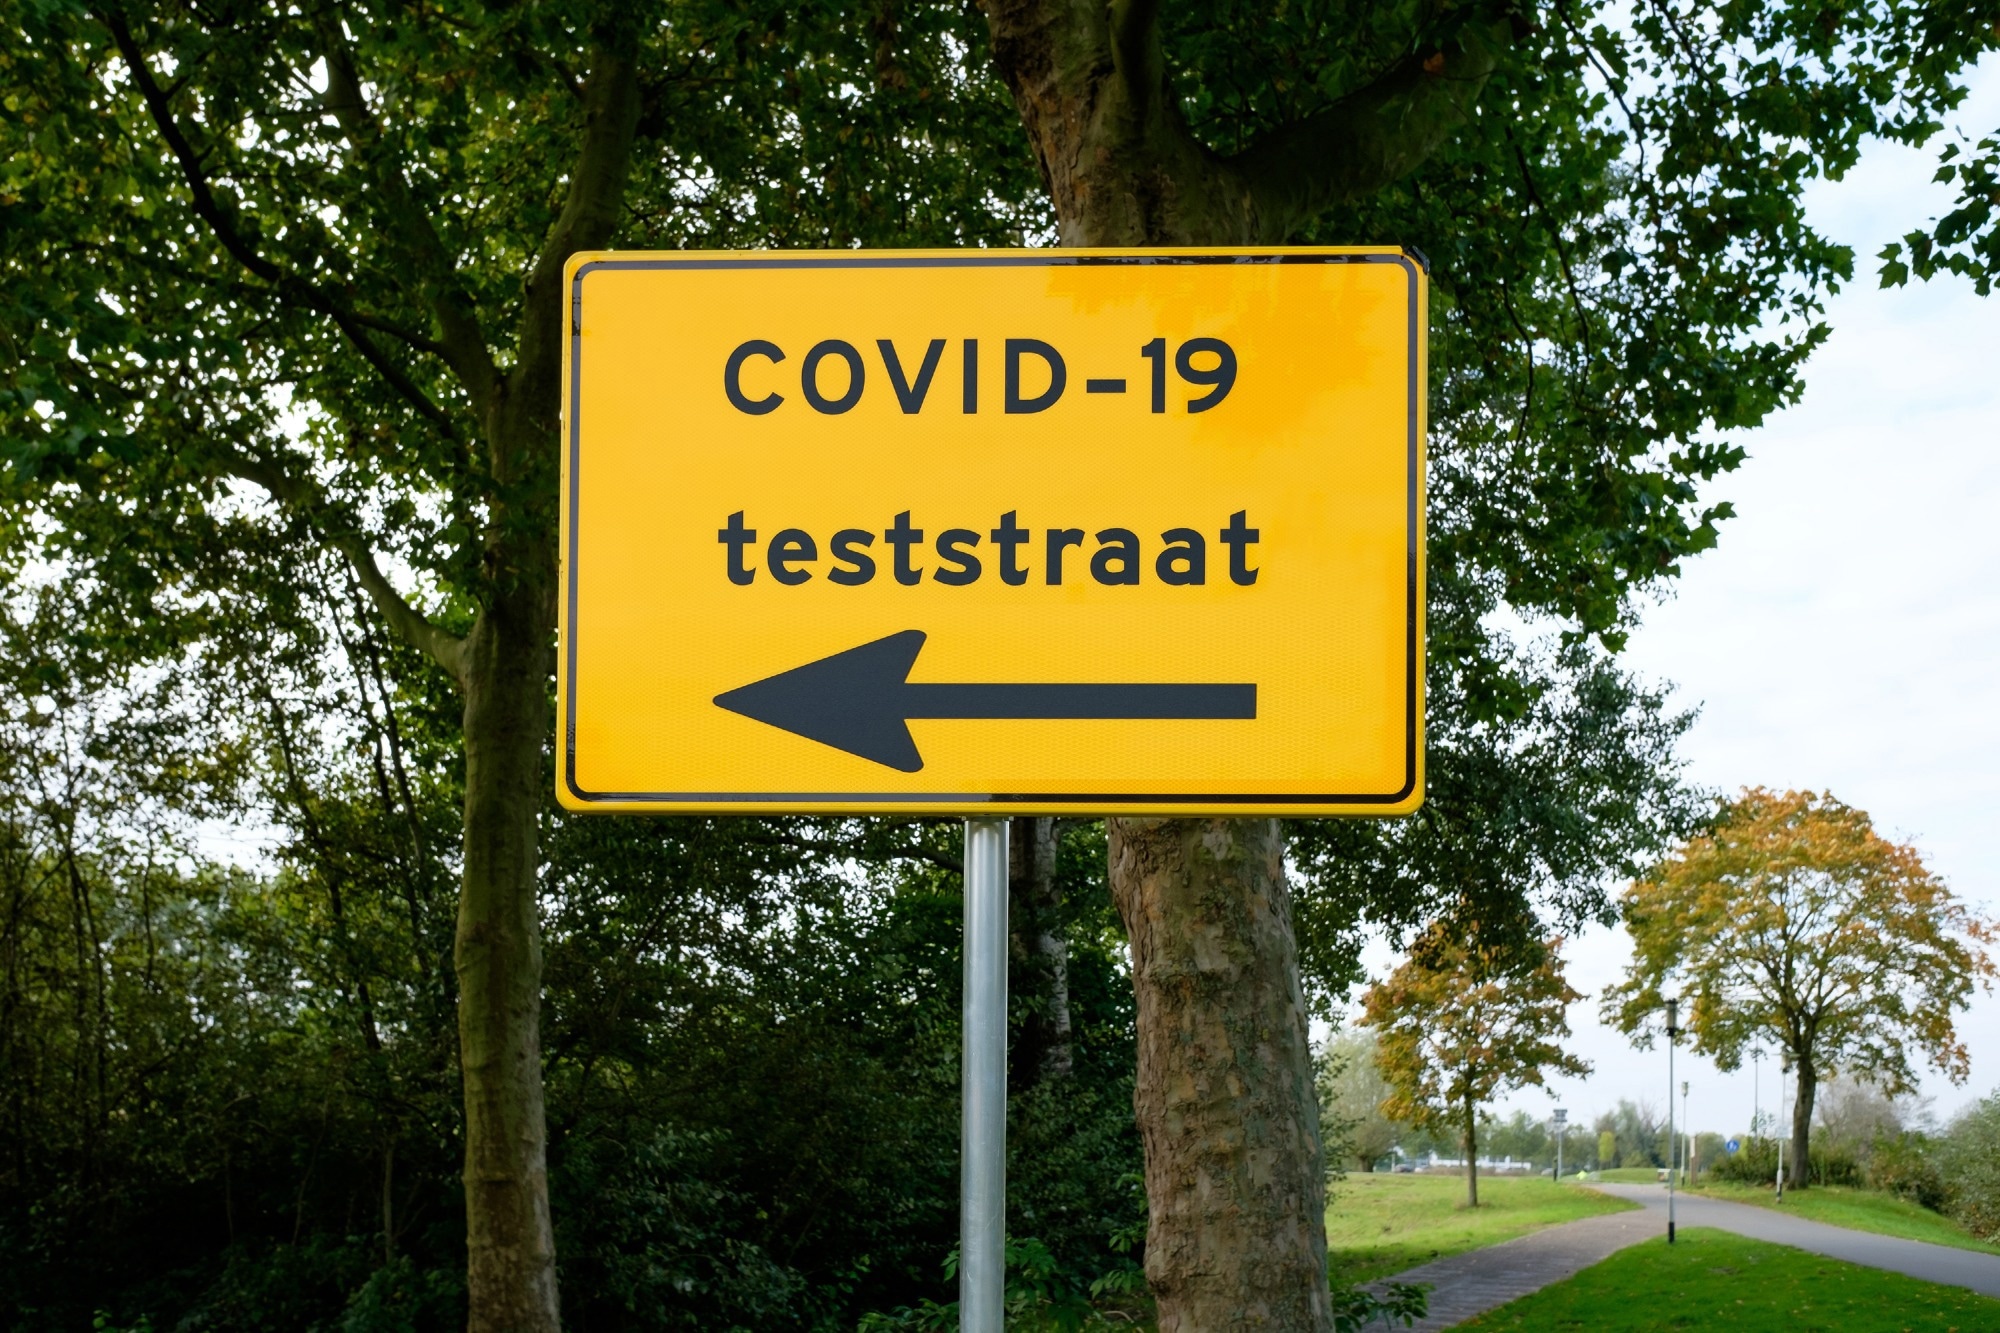 Study: Number of COVID-19 hospitalisations averted by vaccination: Estimates for the Netherlands, January 6, 2021 through August 30, 2022. ​​​​​​​Image Credit: Hung Chung Chih / Shutterstock